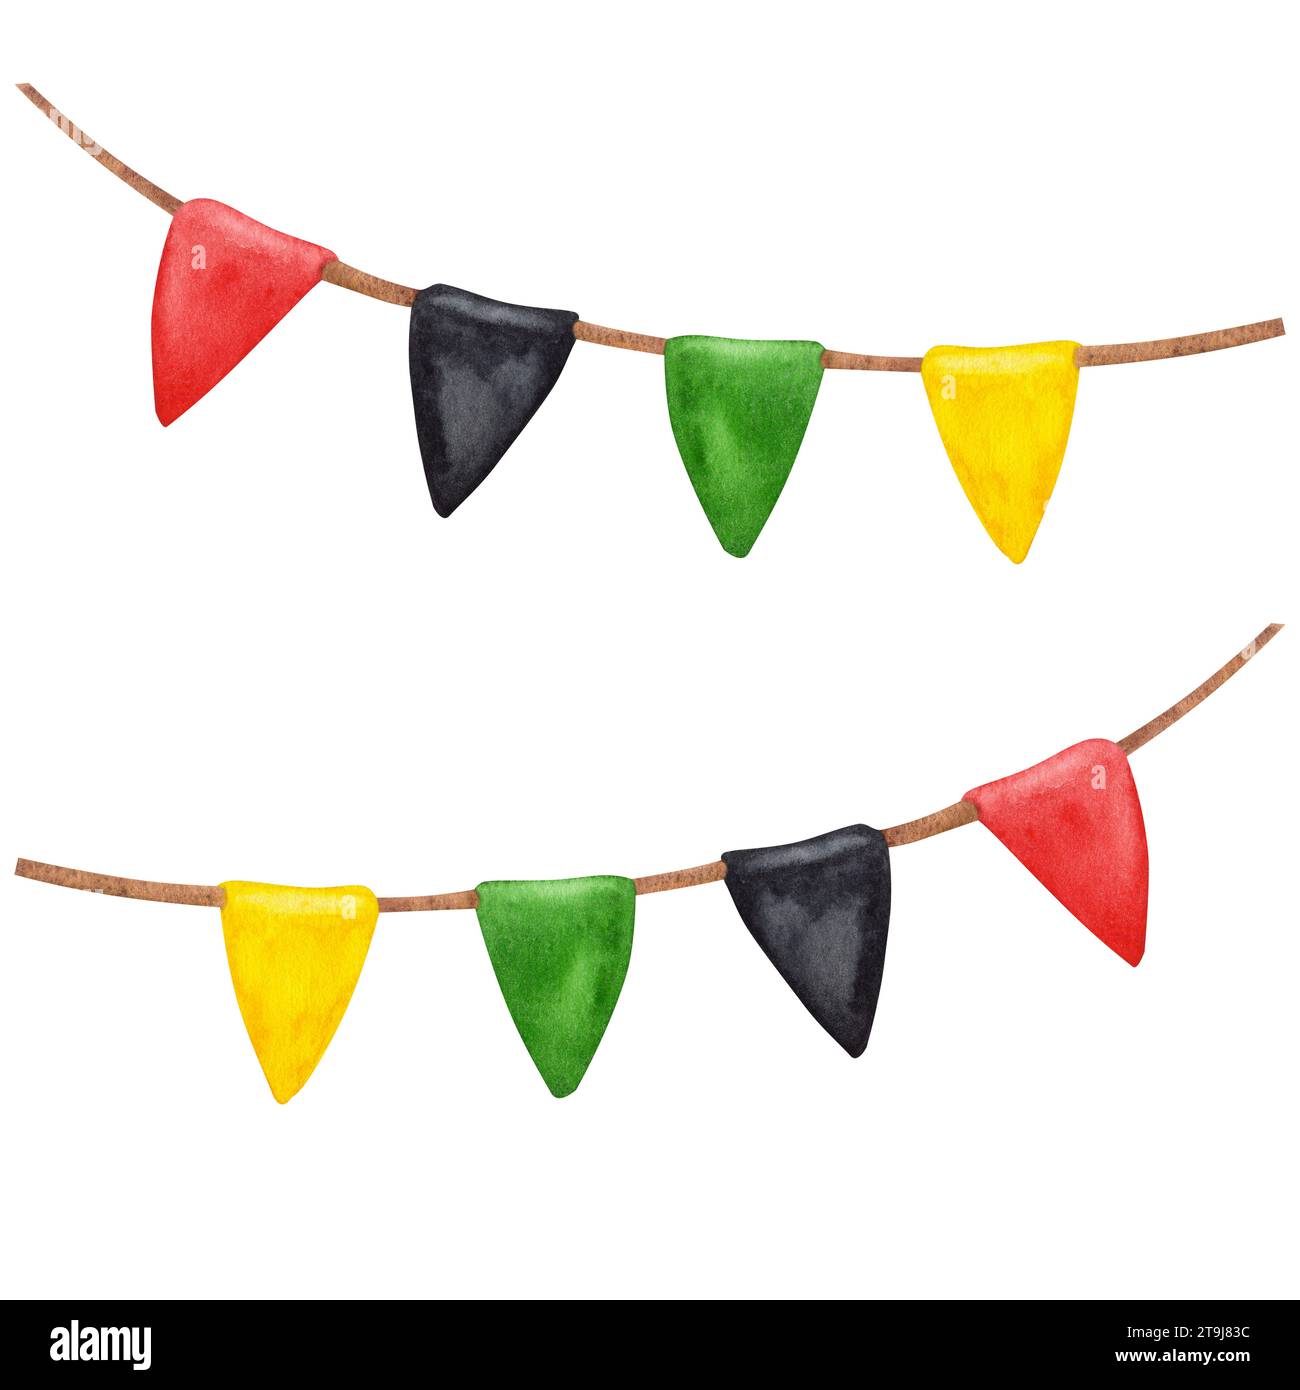 Triangular colorful flags garland red green black yellow. Kwanzaa holiday. Black history month. Hand drawn watercolor illustration isolated background Stock Photo